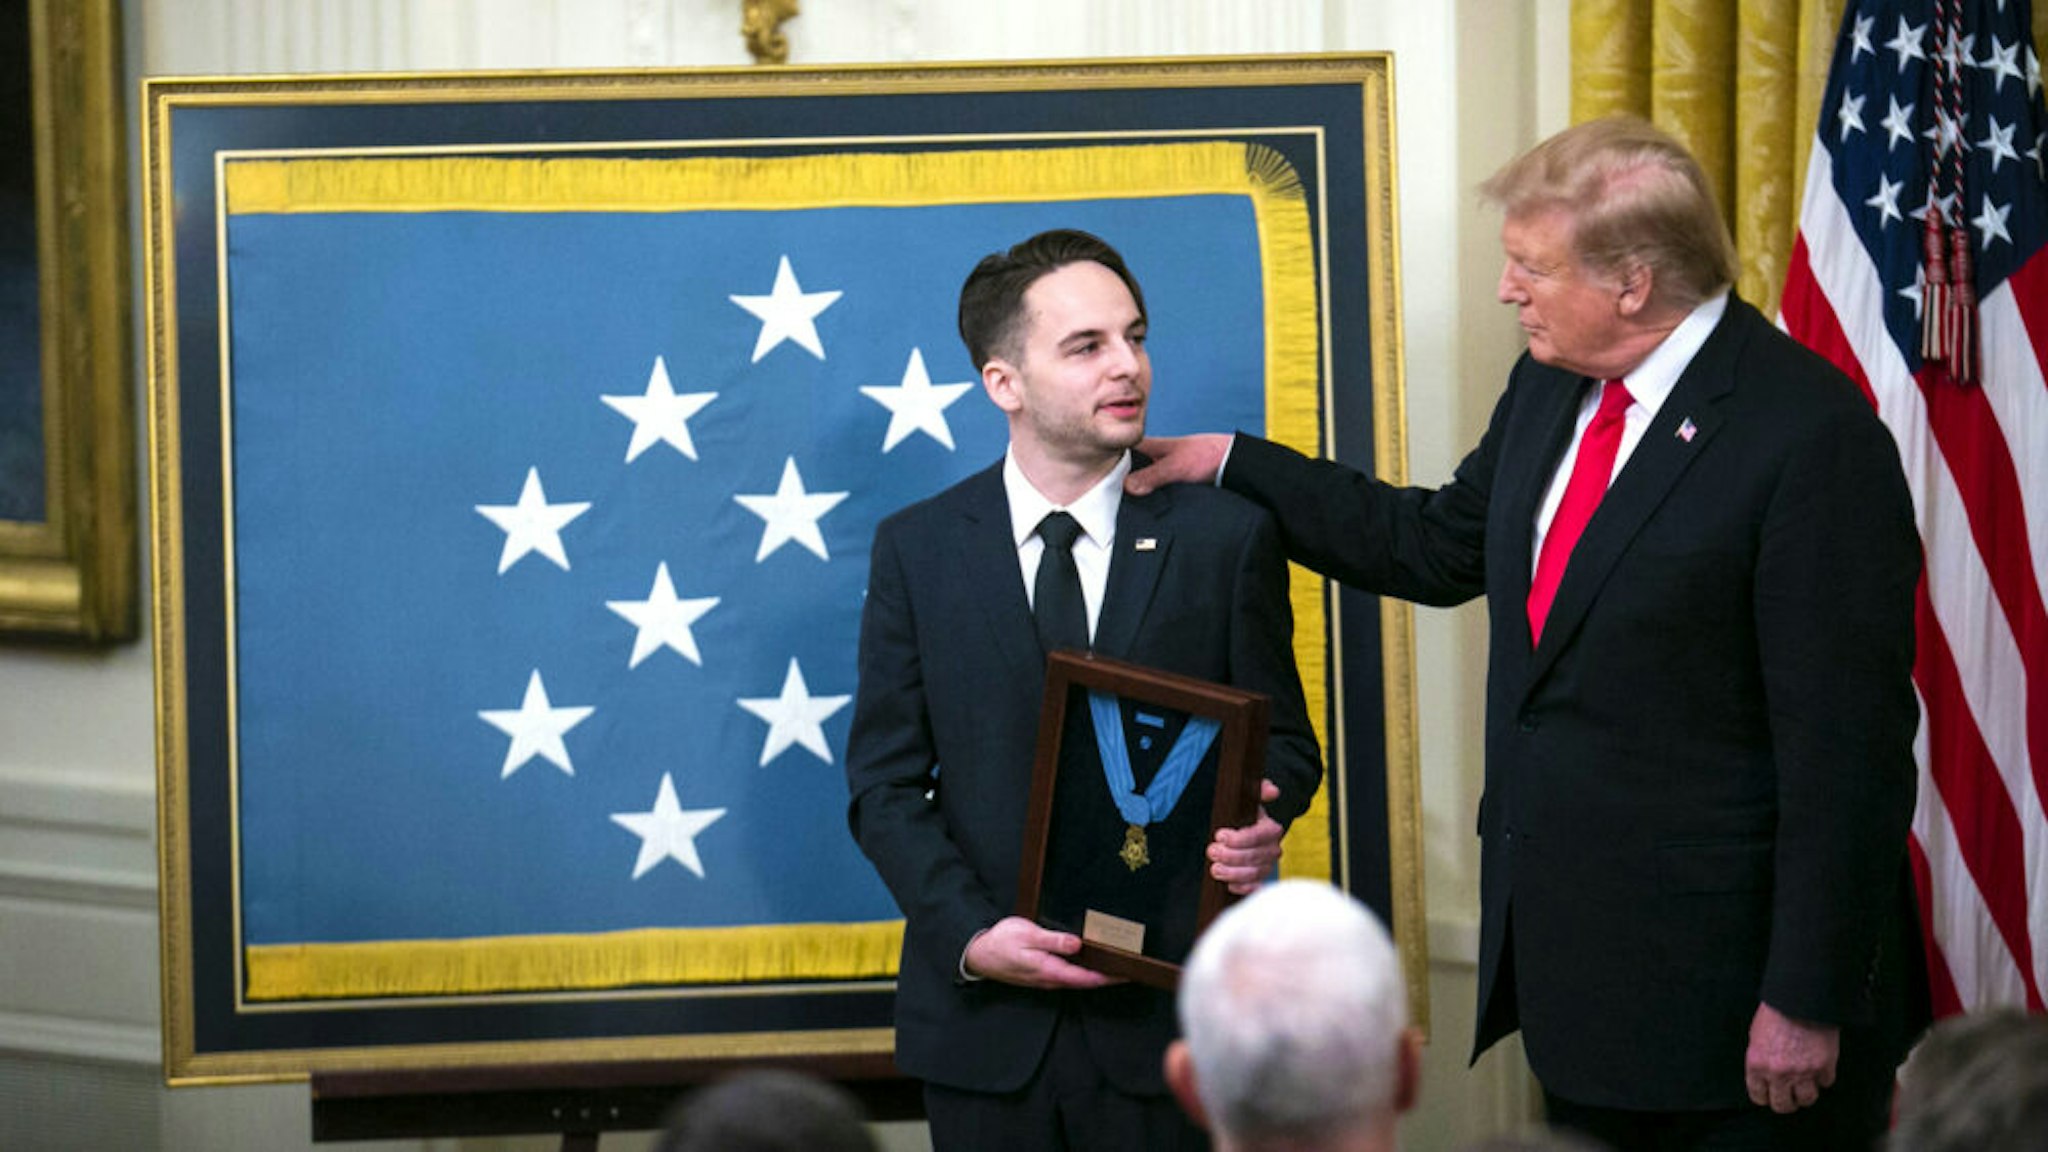 U.S. President Donald Trump, right, presents the Medal of Honor to Trevor Oliver, son of Staff Sergeant Travis Atkins, left, during a ceremony in the East Room of the White House in Washington, D.C., U.S., on Wednesday, March 27, 2019. Trump awarded the Medal of Honor posthumously to Staff Sergeant Travis Atkins, the first he bestowed to an Iraq War veteran.